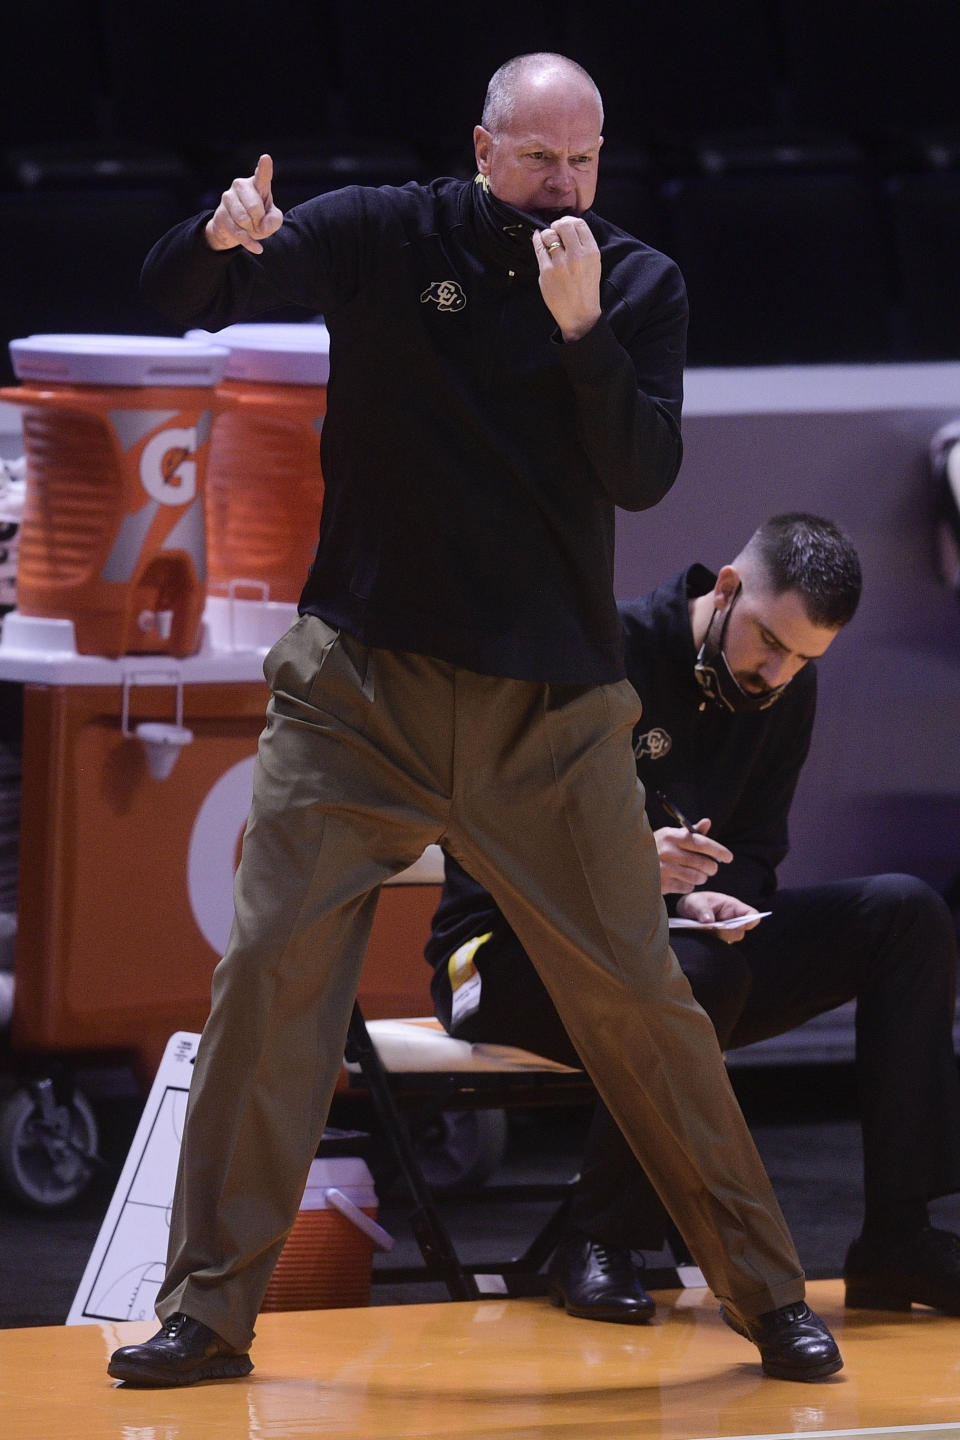 Colorado coach Tad Boyle calls from the sideline during the team's NCAA college basketball game against Tennessee on Tuesday, Dec. 8, 2020, in Knoxville, Tenn. (Caitie McMekin/Knoxville New-Sentinel via AP)